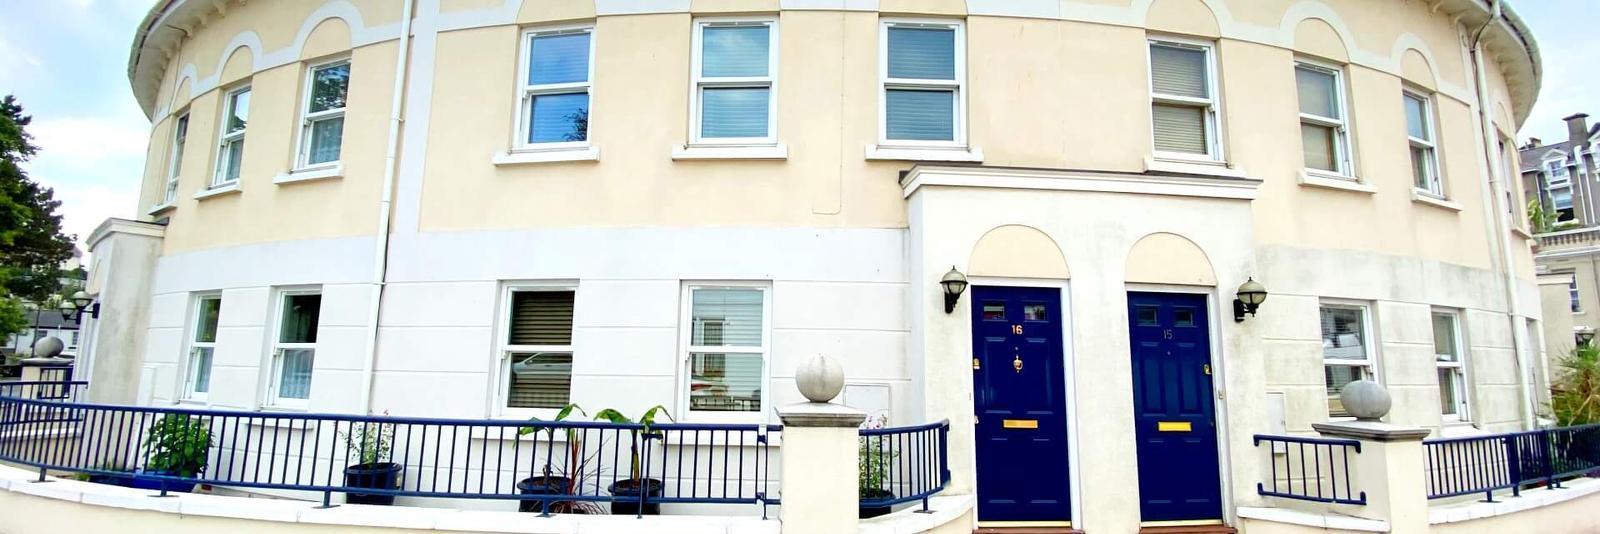 The Lisburne Place Self Catering Luxury Holiday Home, Torquay